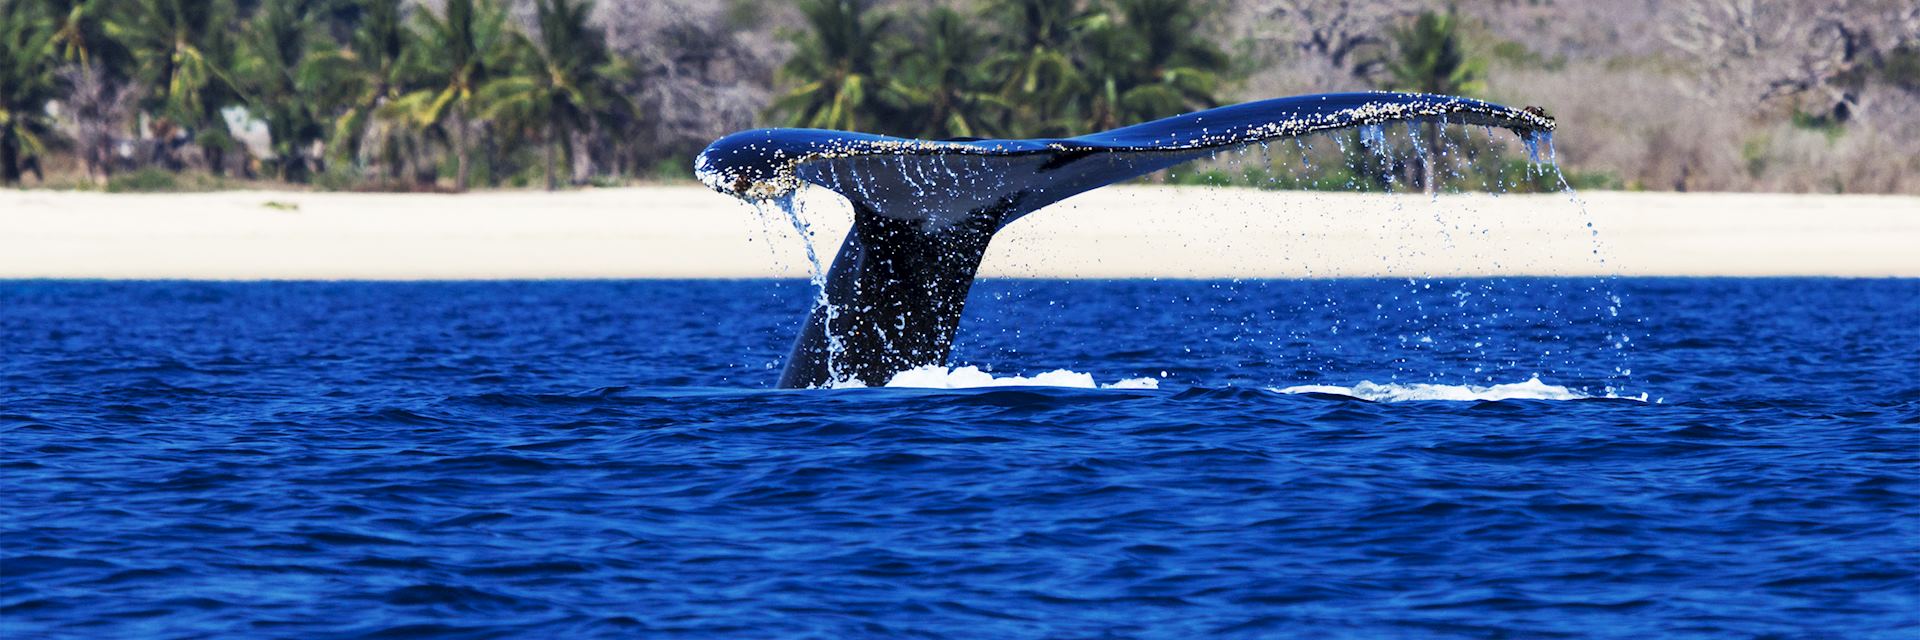 Humpback whale off the coast of Mozambique